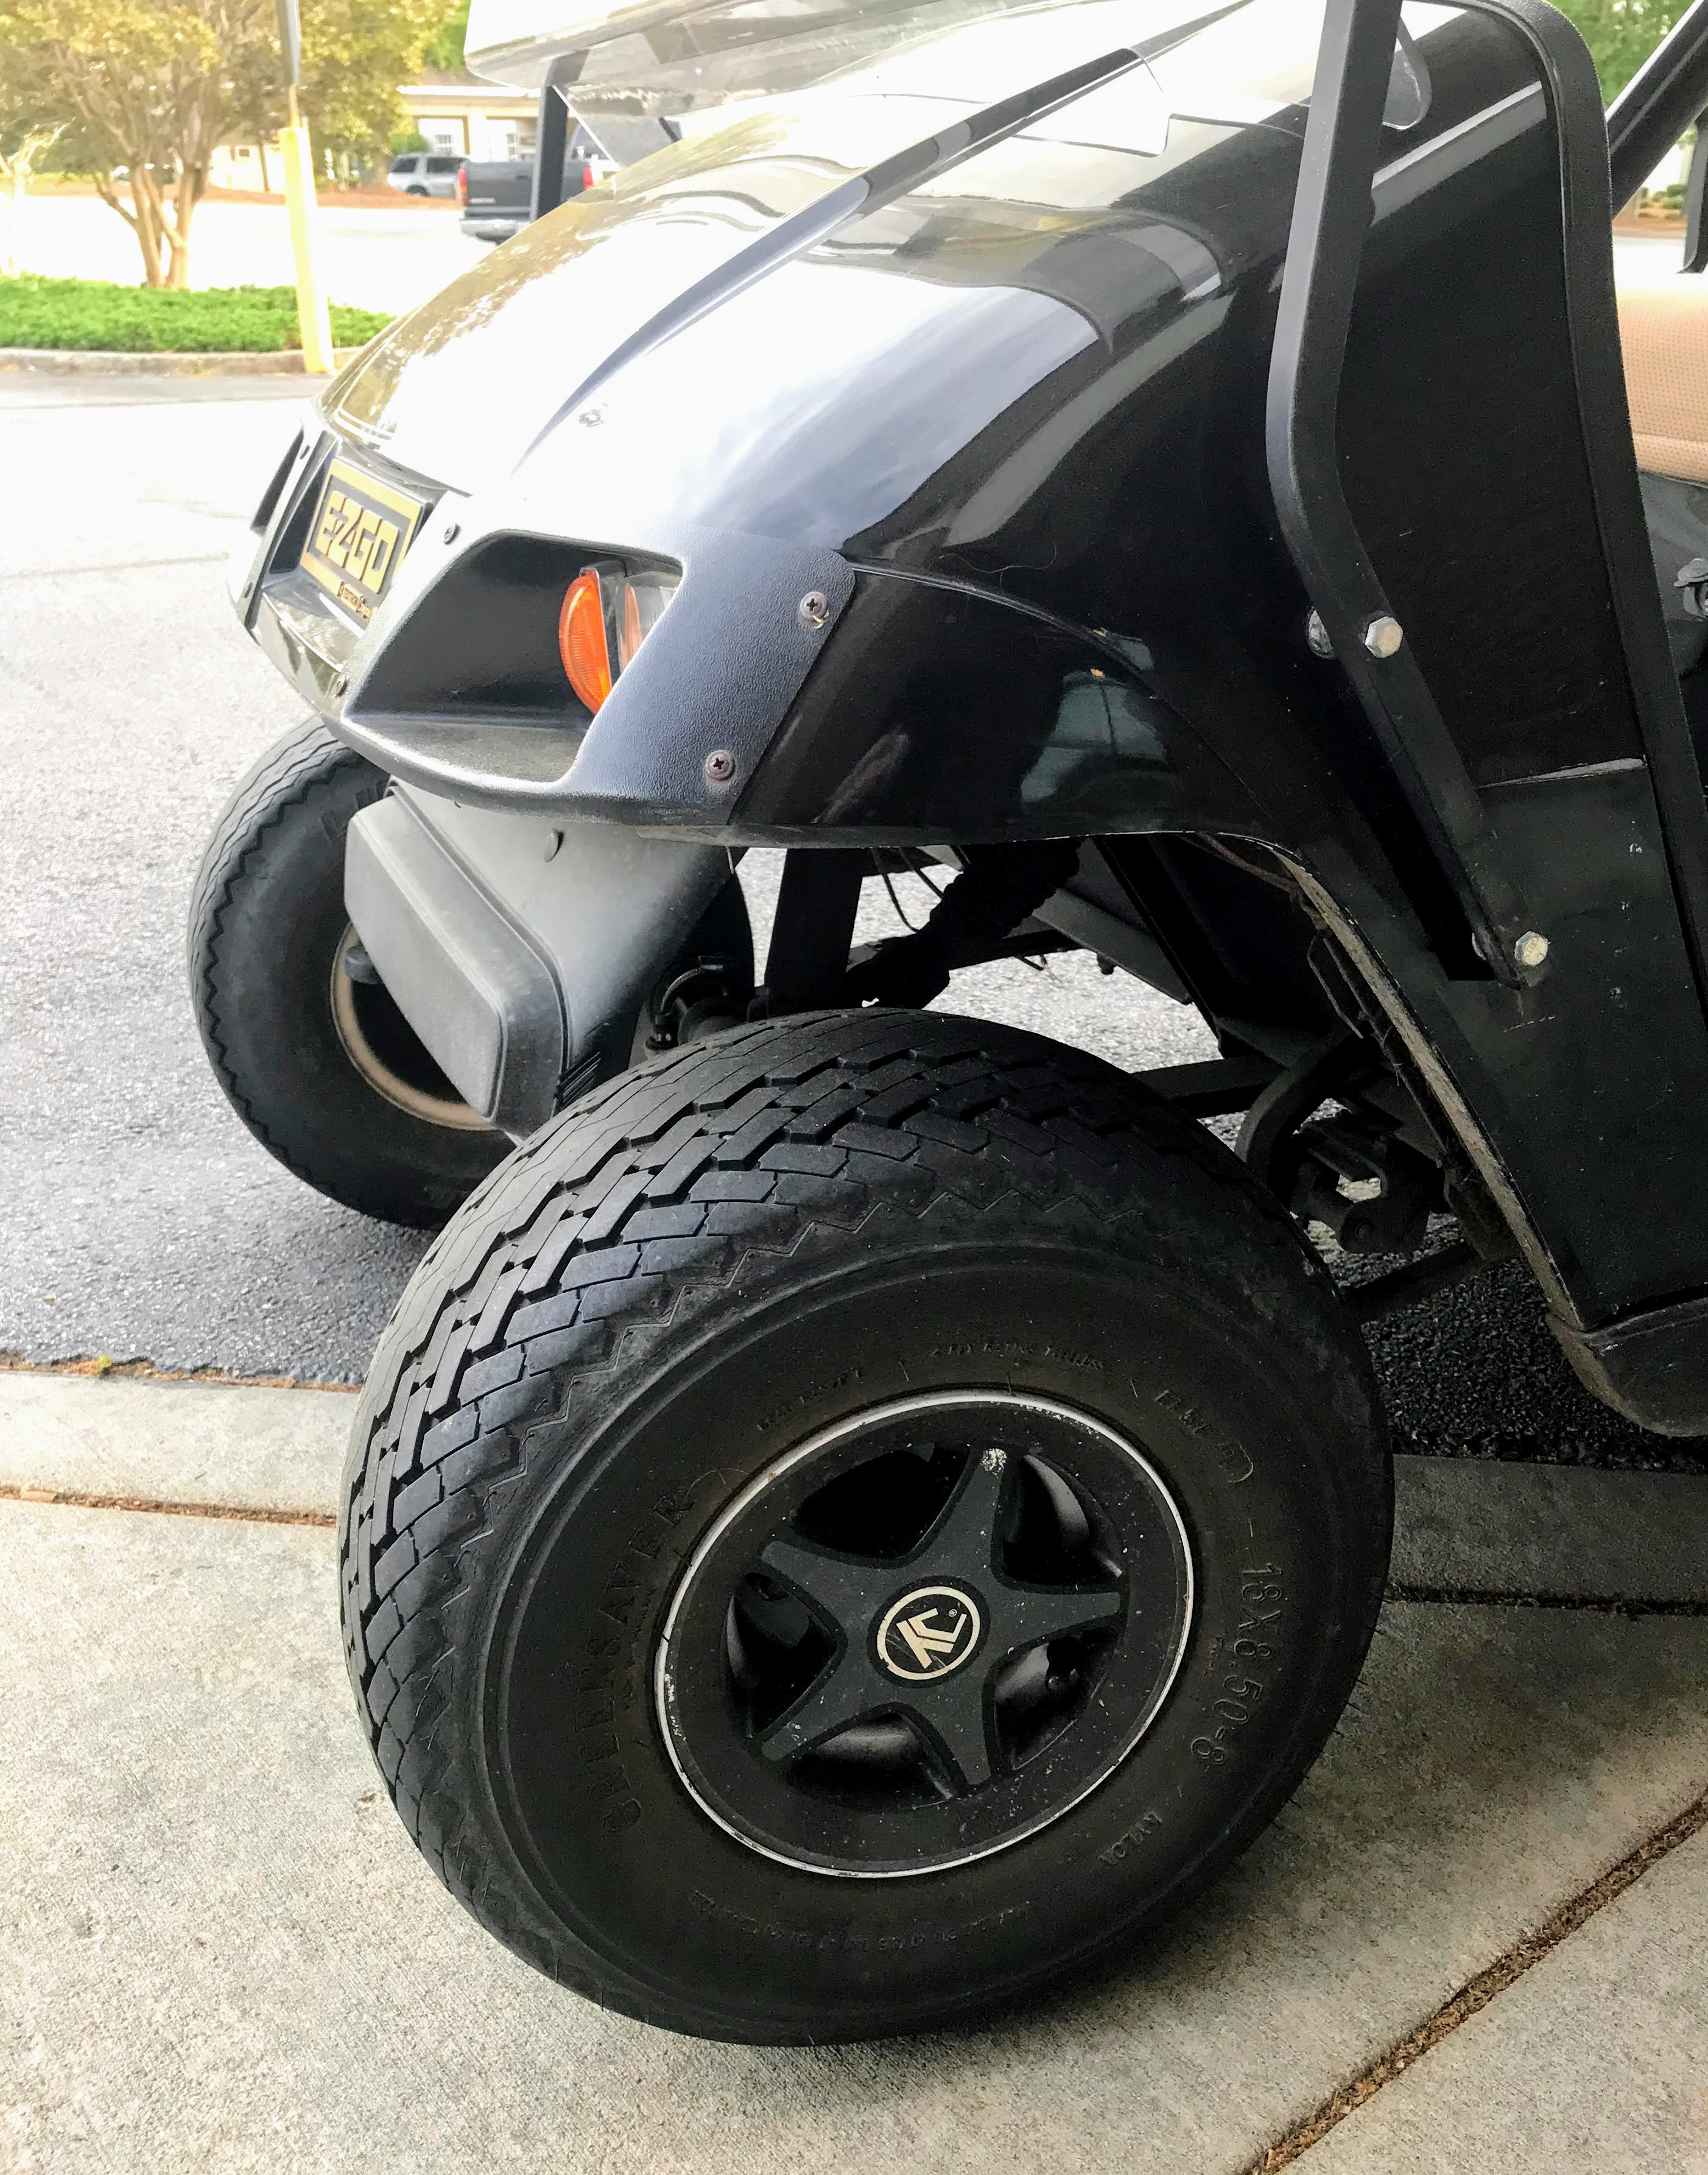 standard or stock golf cart tire size